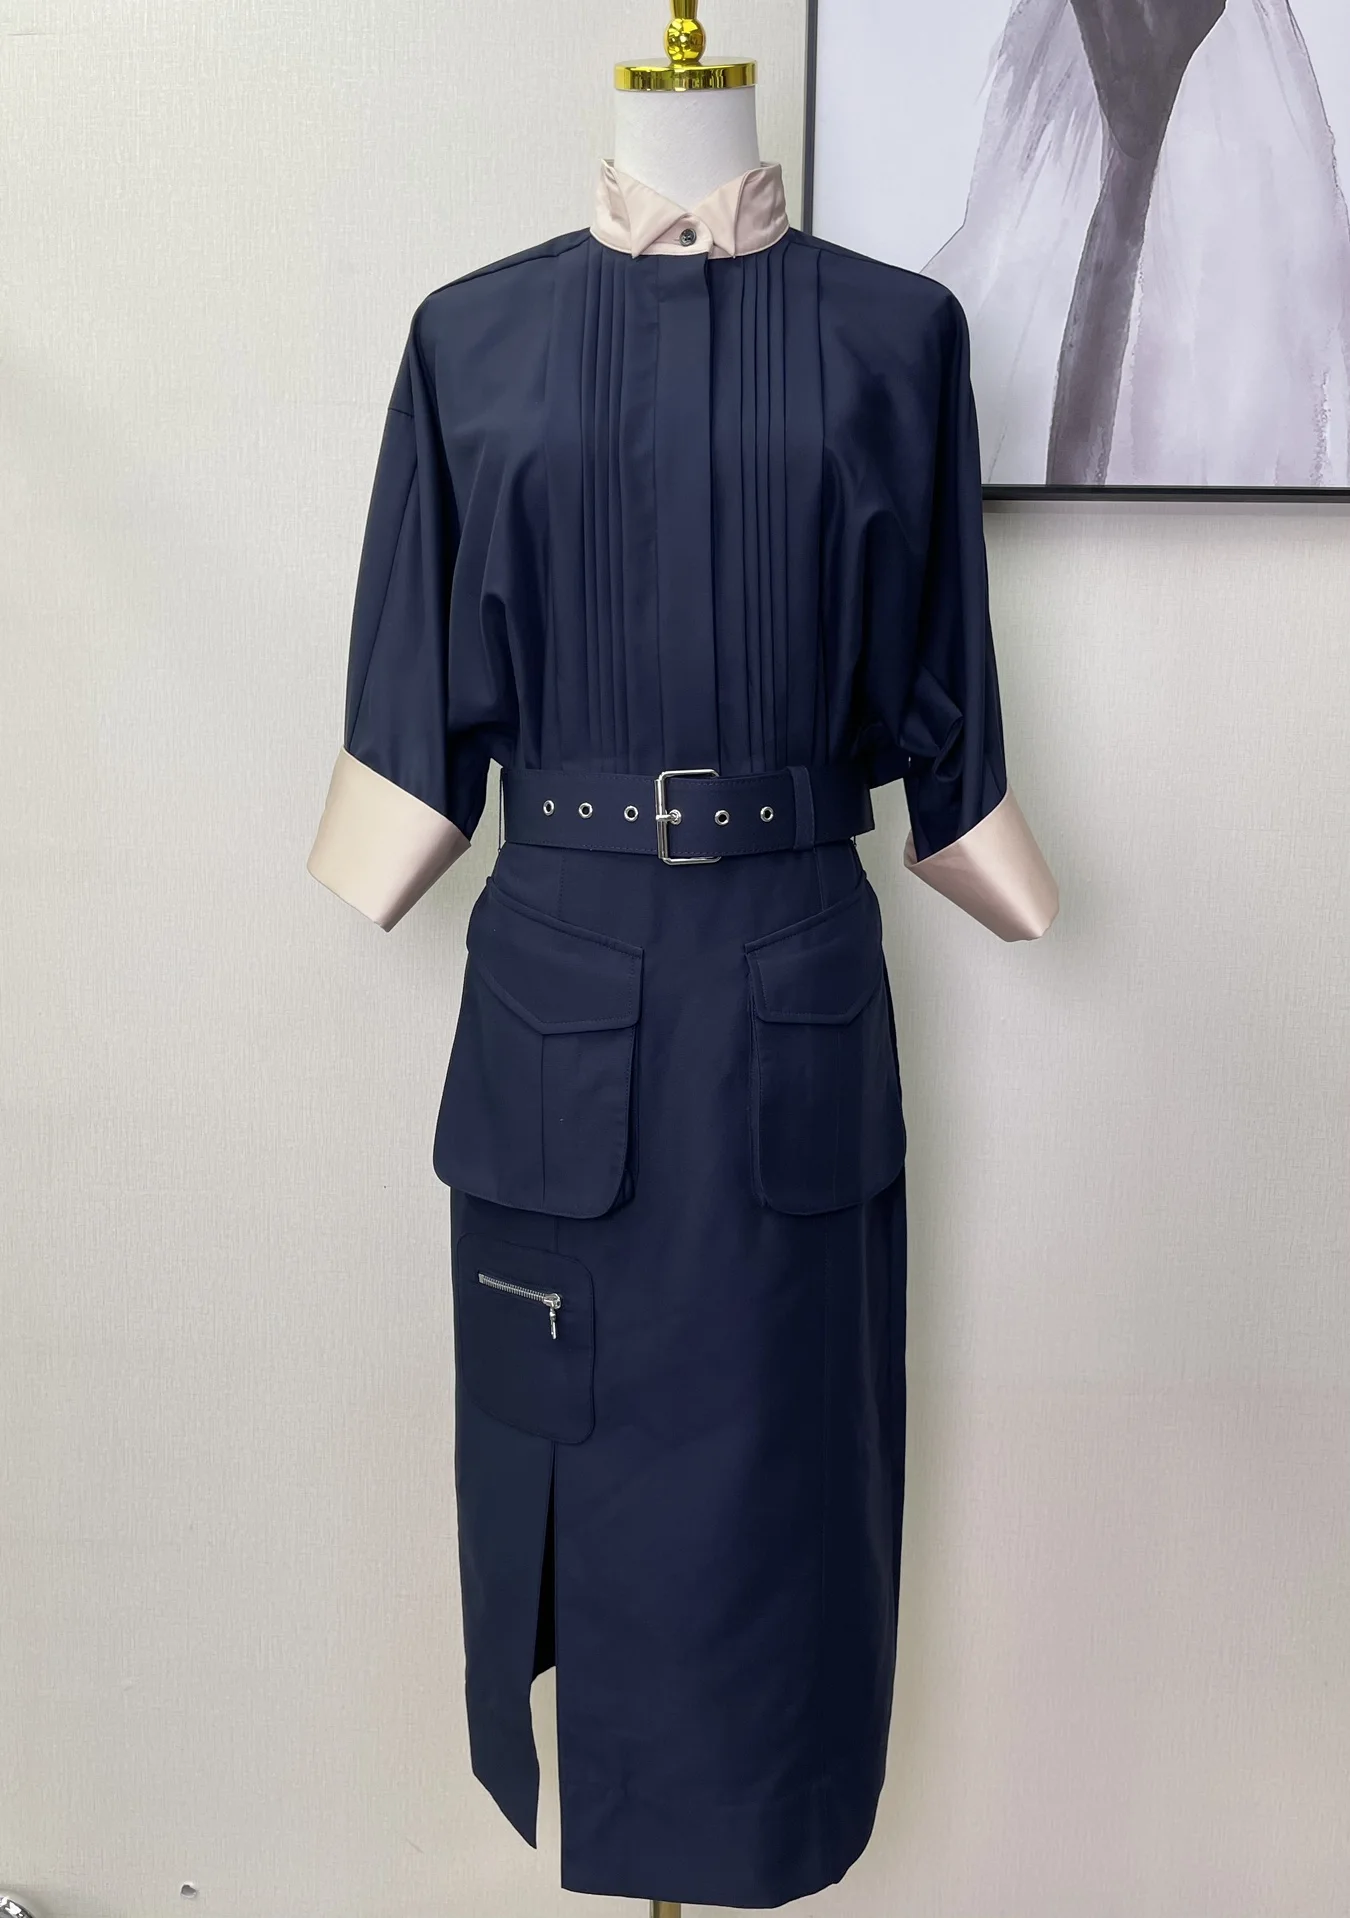 

Spring and summer new dress, belt design layer is very rich, senior and feminine